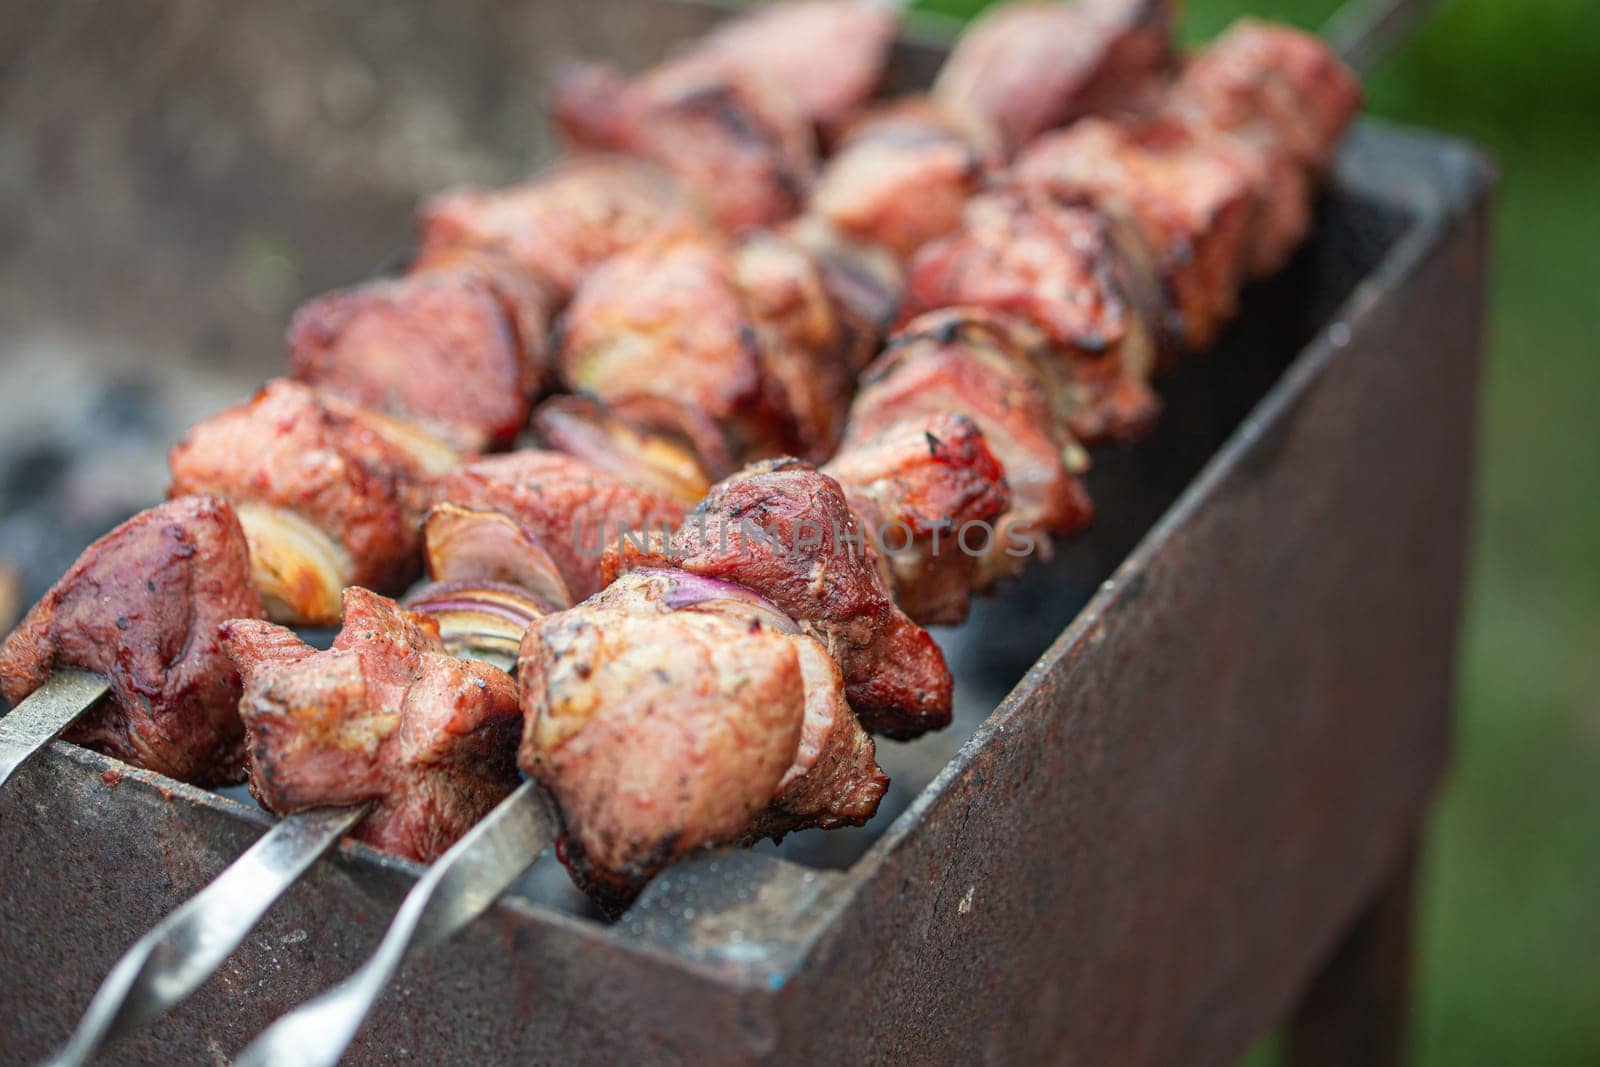 Outdoor picnic with grilling fresh meat shish kebab (shashlik) on a steel skewers on a grill wood coal. BBQ on summer picnic in green garden.